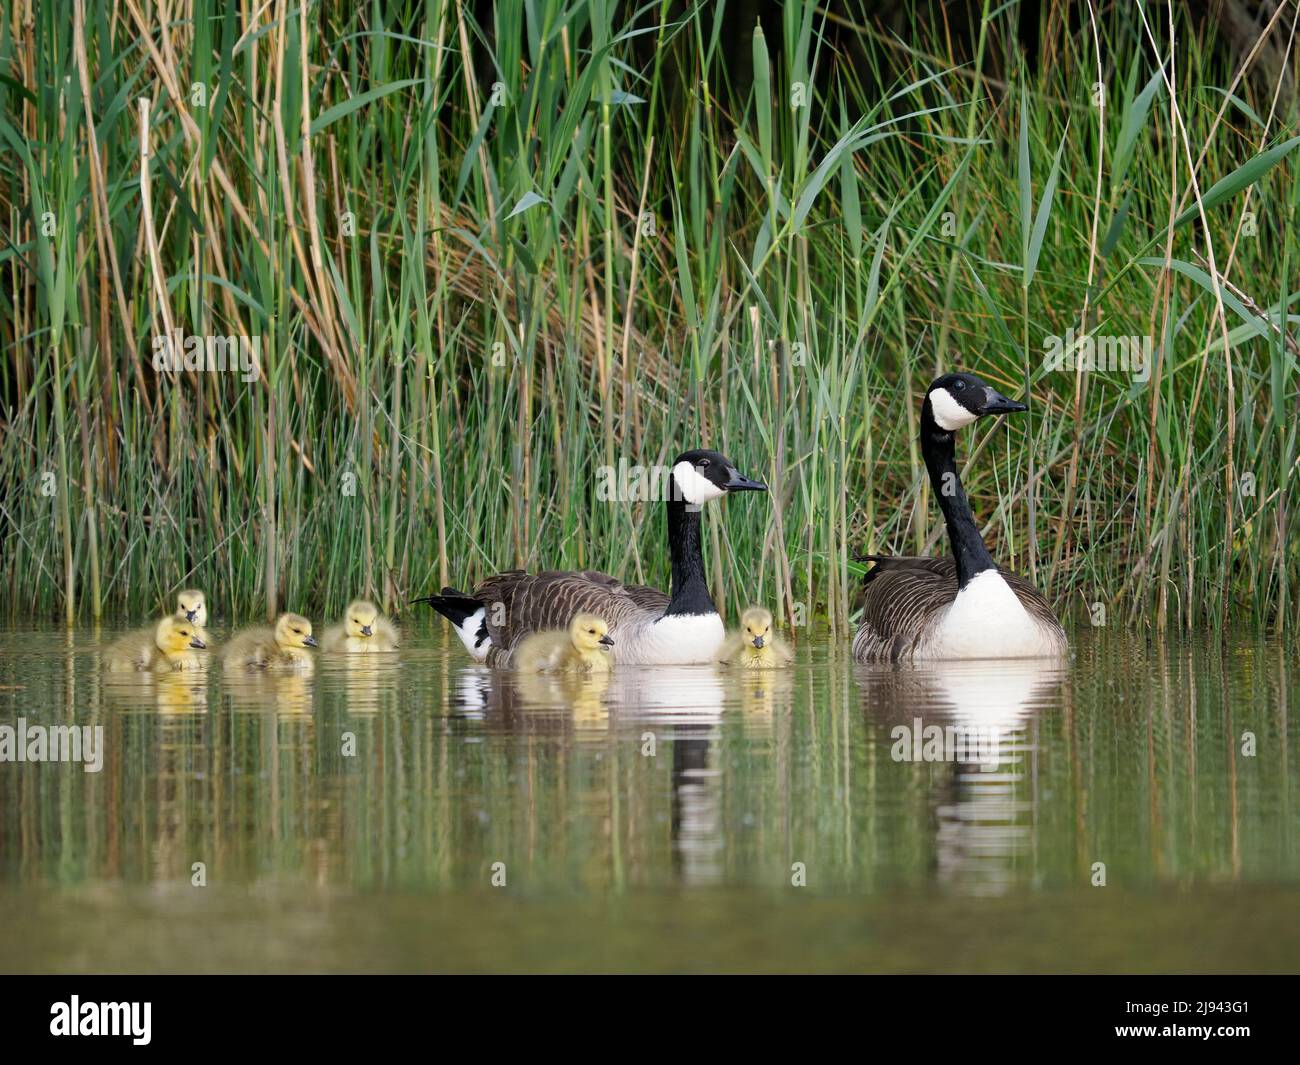 Canada goose, Branta canadensis, family of birds with young goslings, Warwickshire, May 2022 Stock Photo